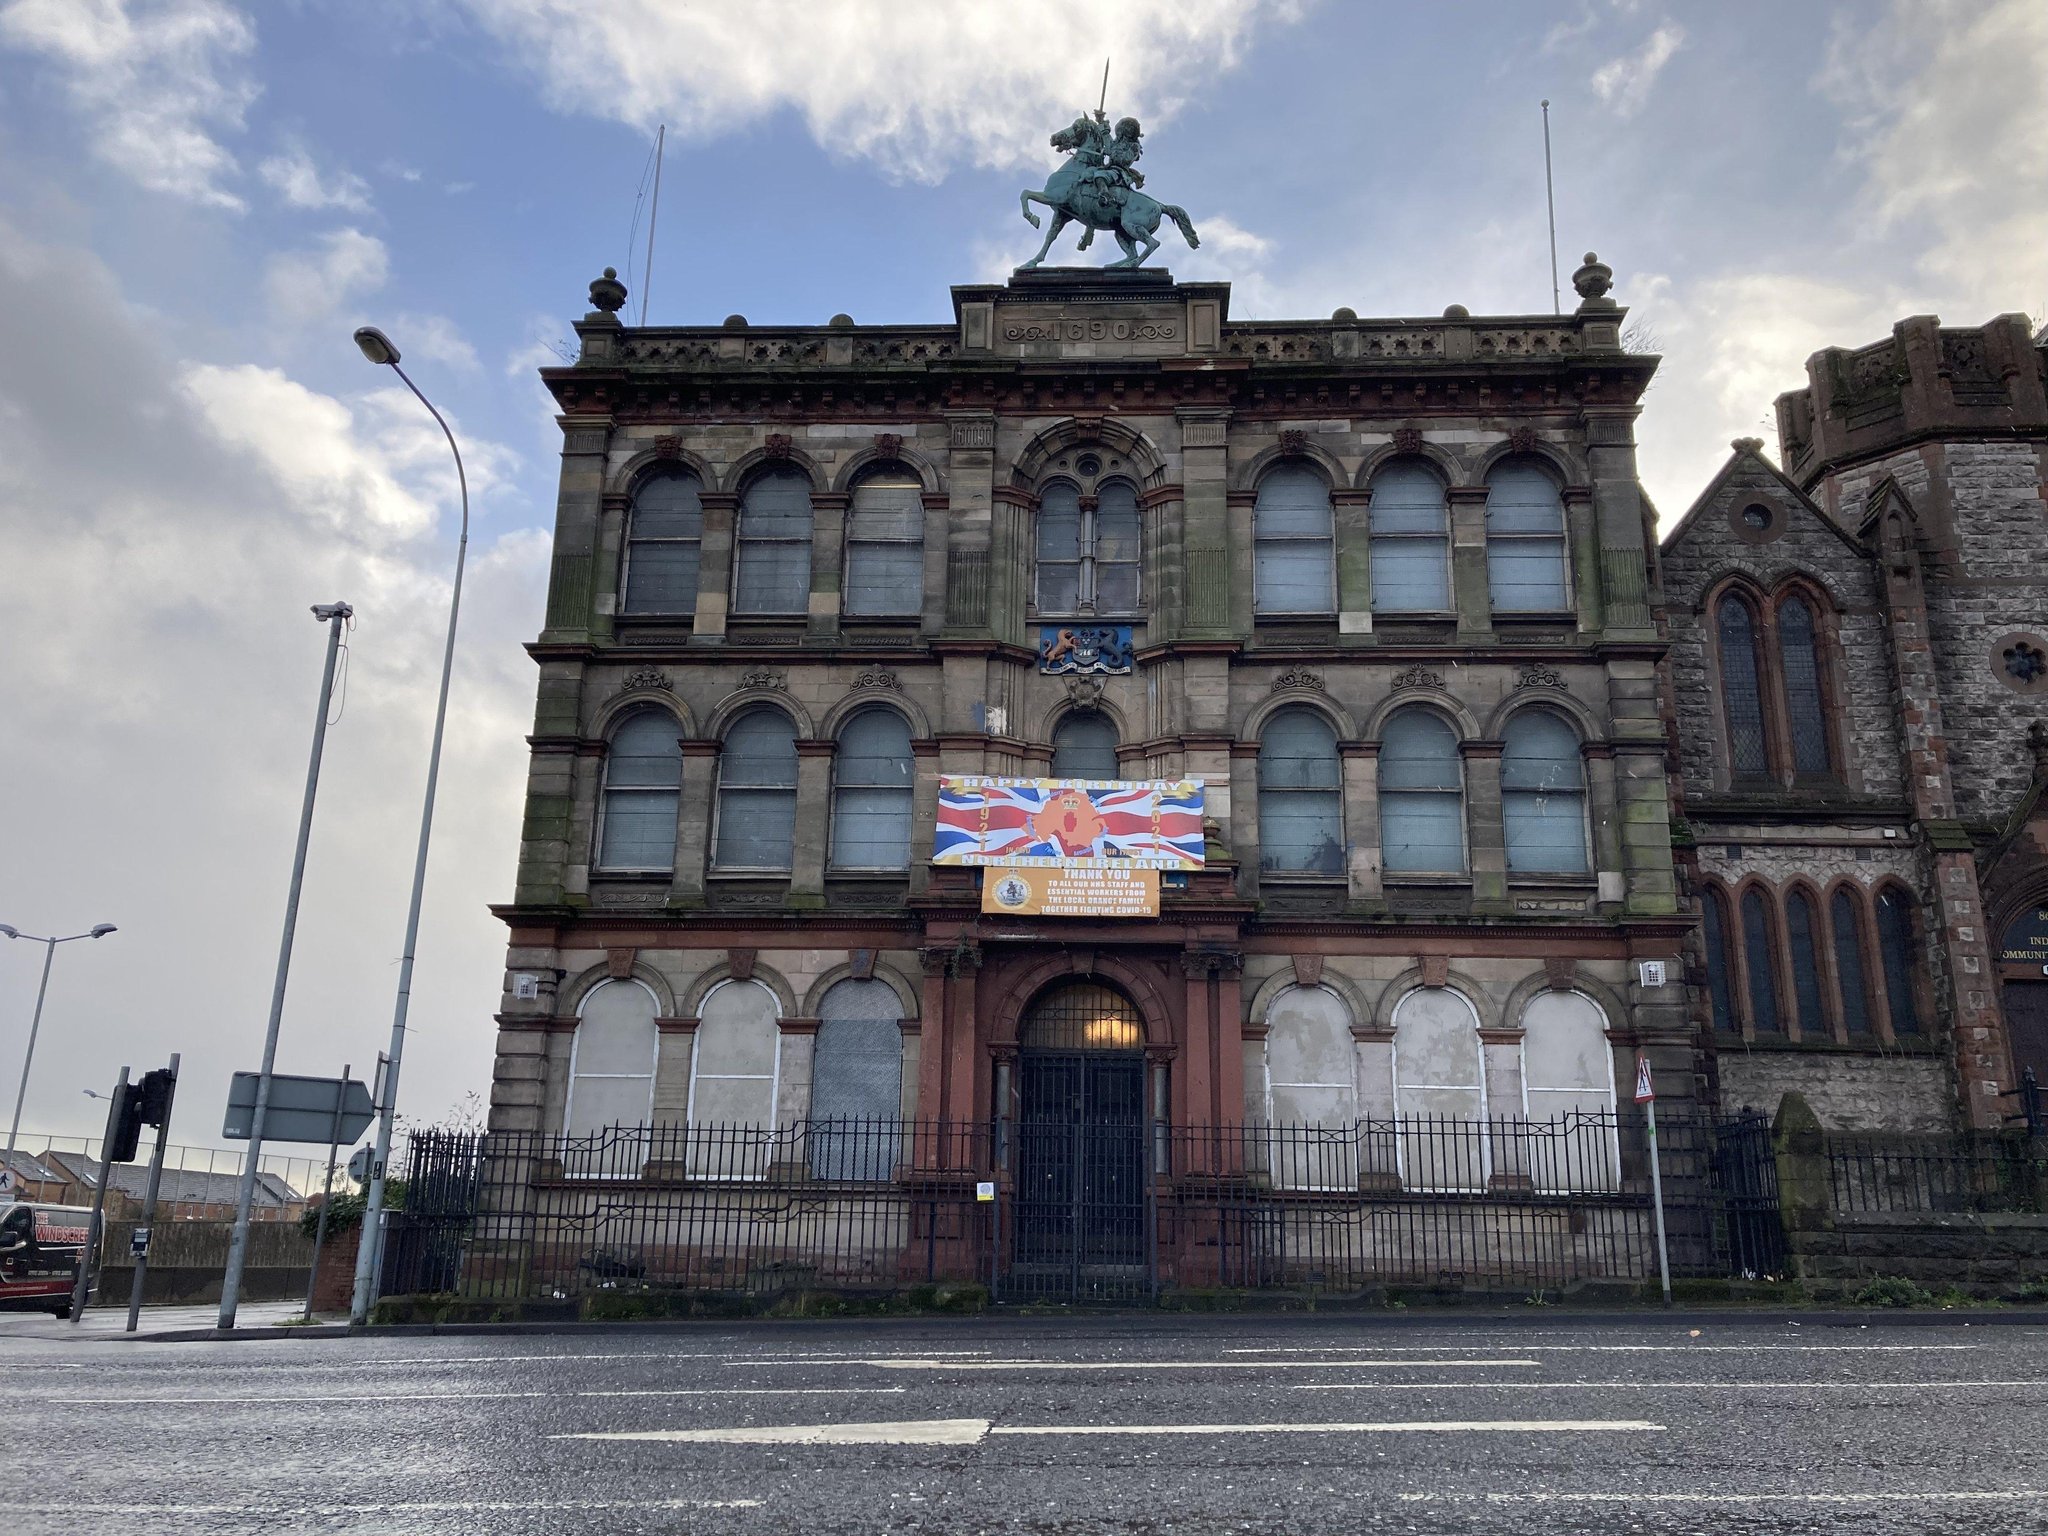 Fragment of human skull found in Orange Hall - police called in